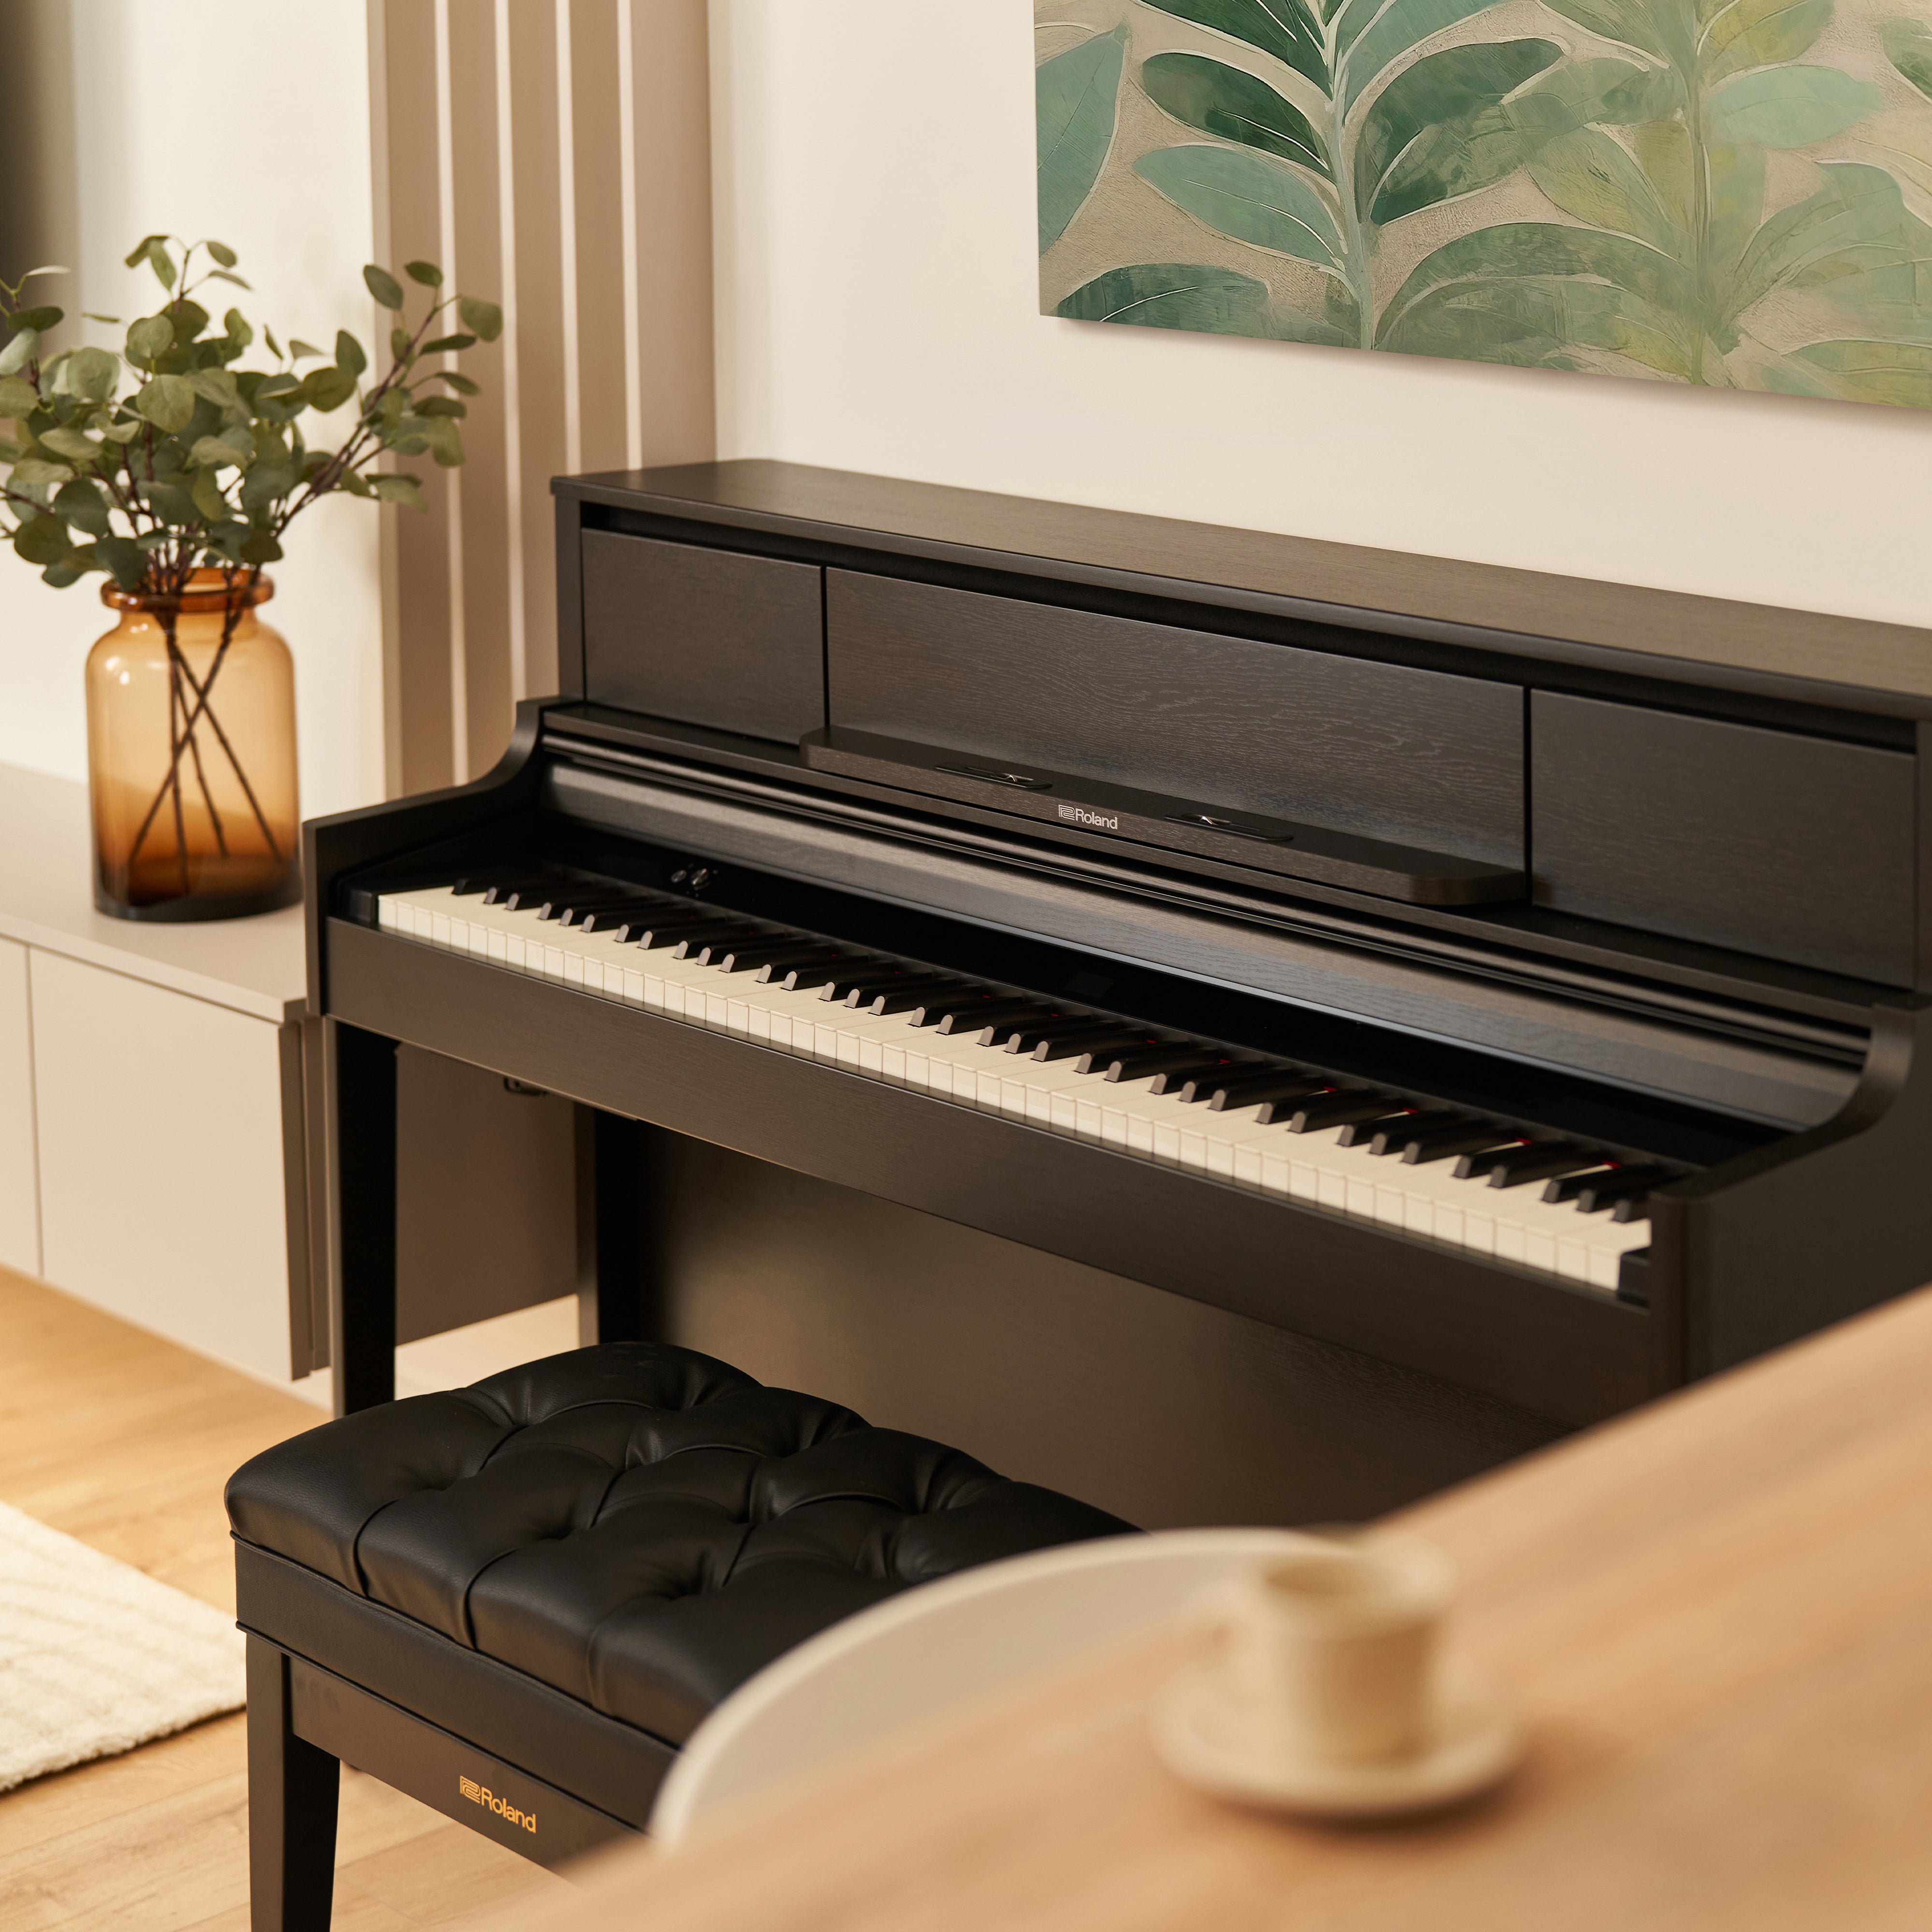 Roland LX-5 Digital Piano with Bench - Charcoal Black - in a modern living room